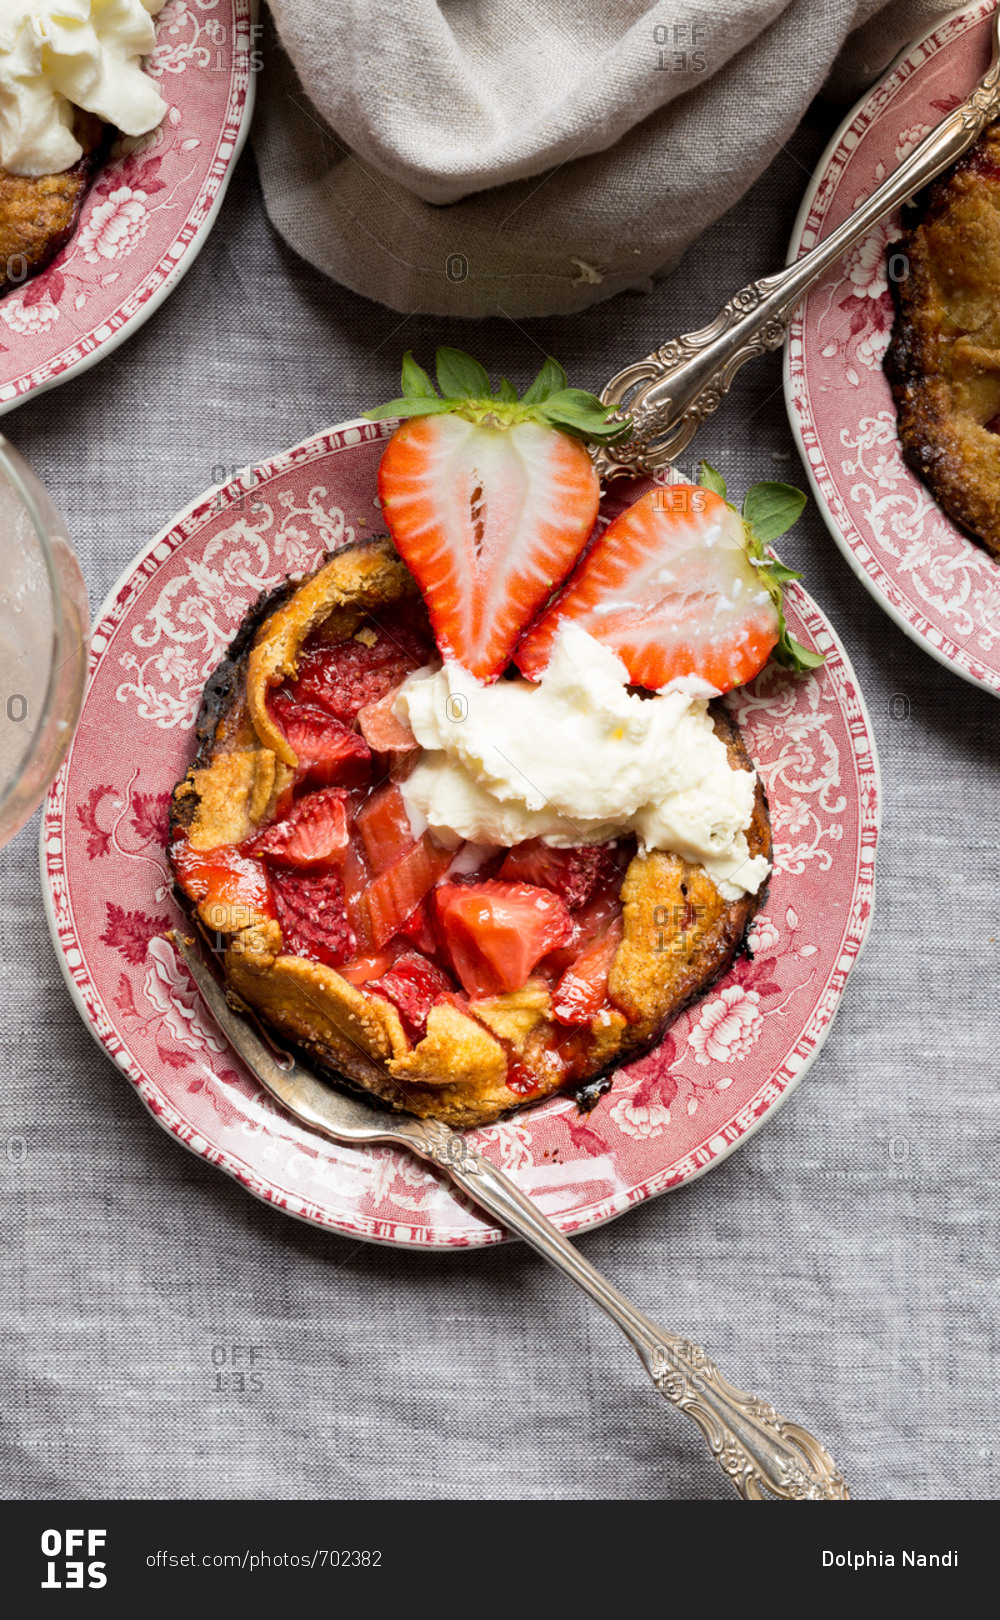 Gluten-free strawberry rhubarb pie on vintage china with rosette wine